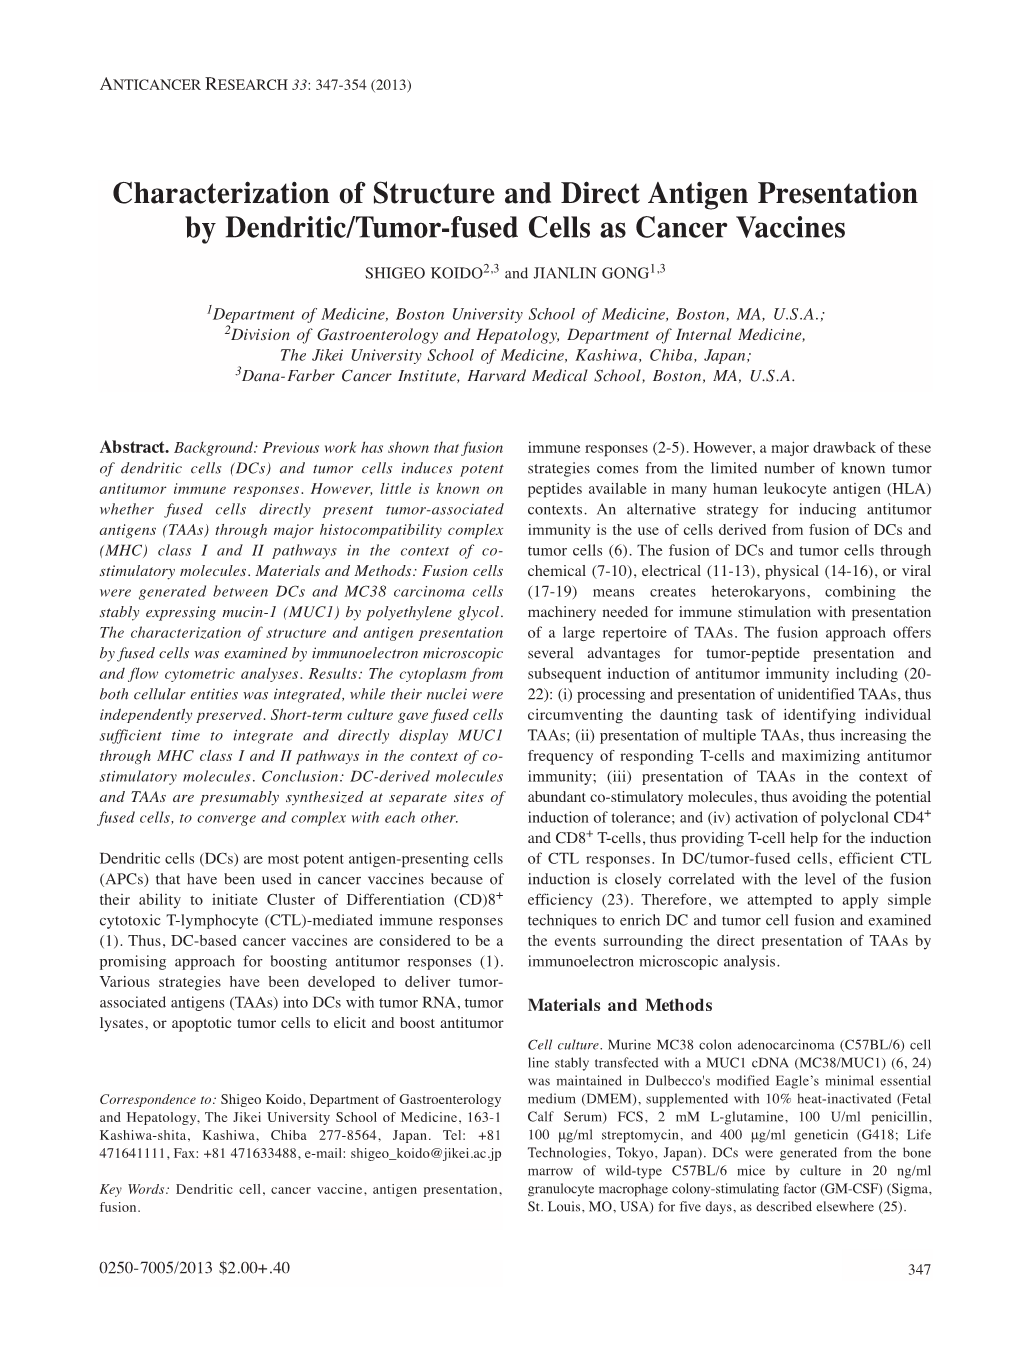 Characterization of Structure and Direct Antigen Presentation by Dendritic/Tumor-Fused Cells As Cancer Vaccines